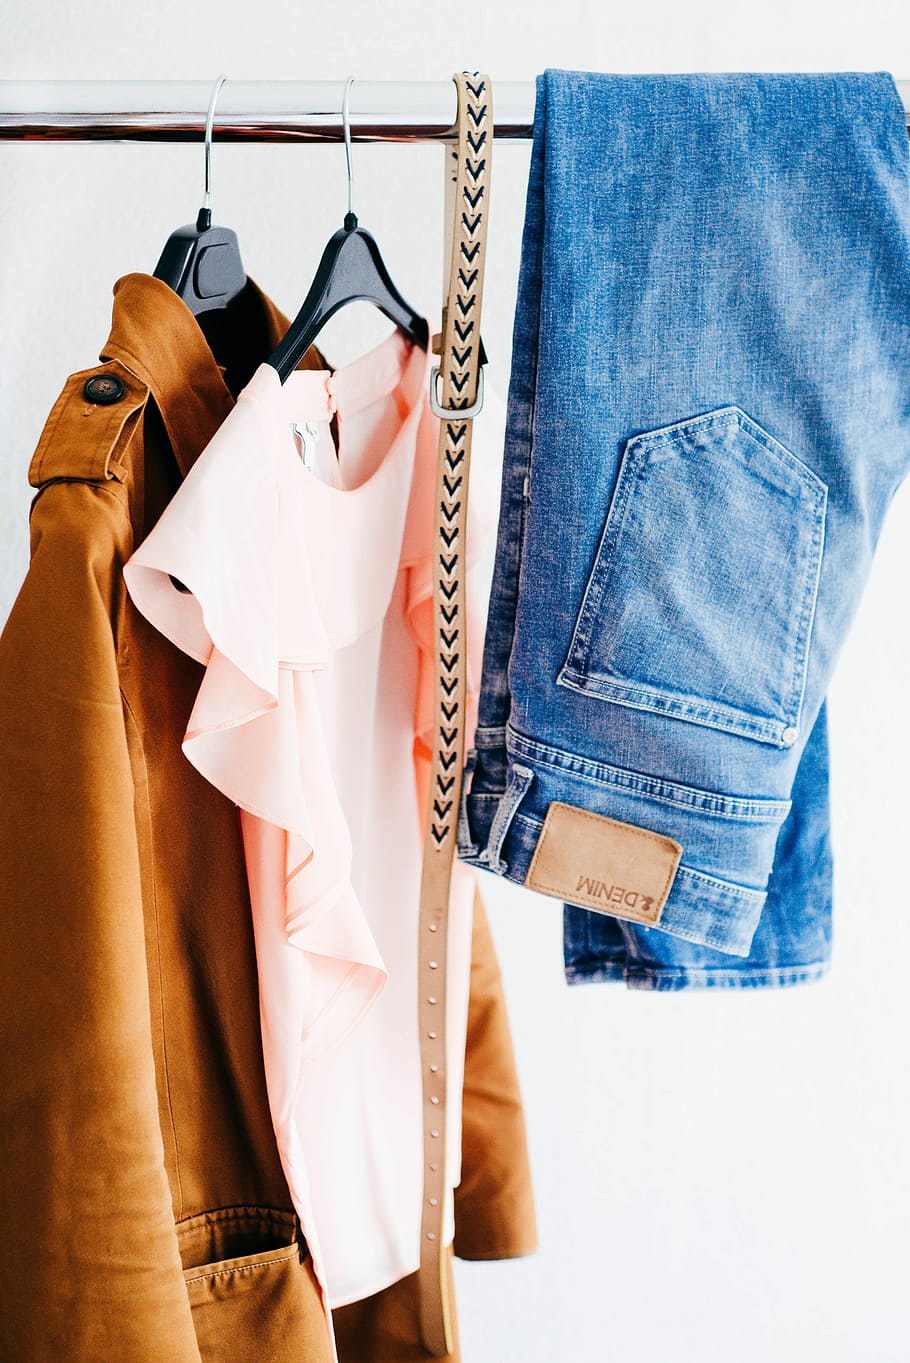 women's four assorted apparel hanged on clothes rack, blue jeans and brown coat hanging on black bar